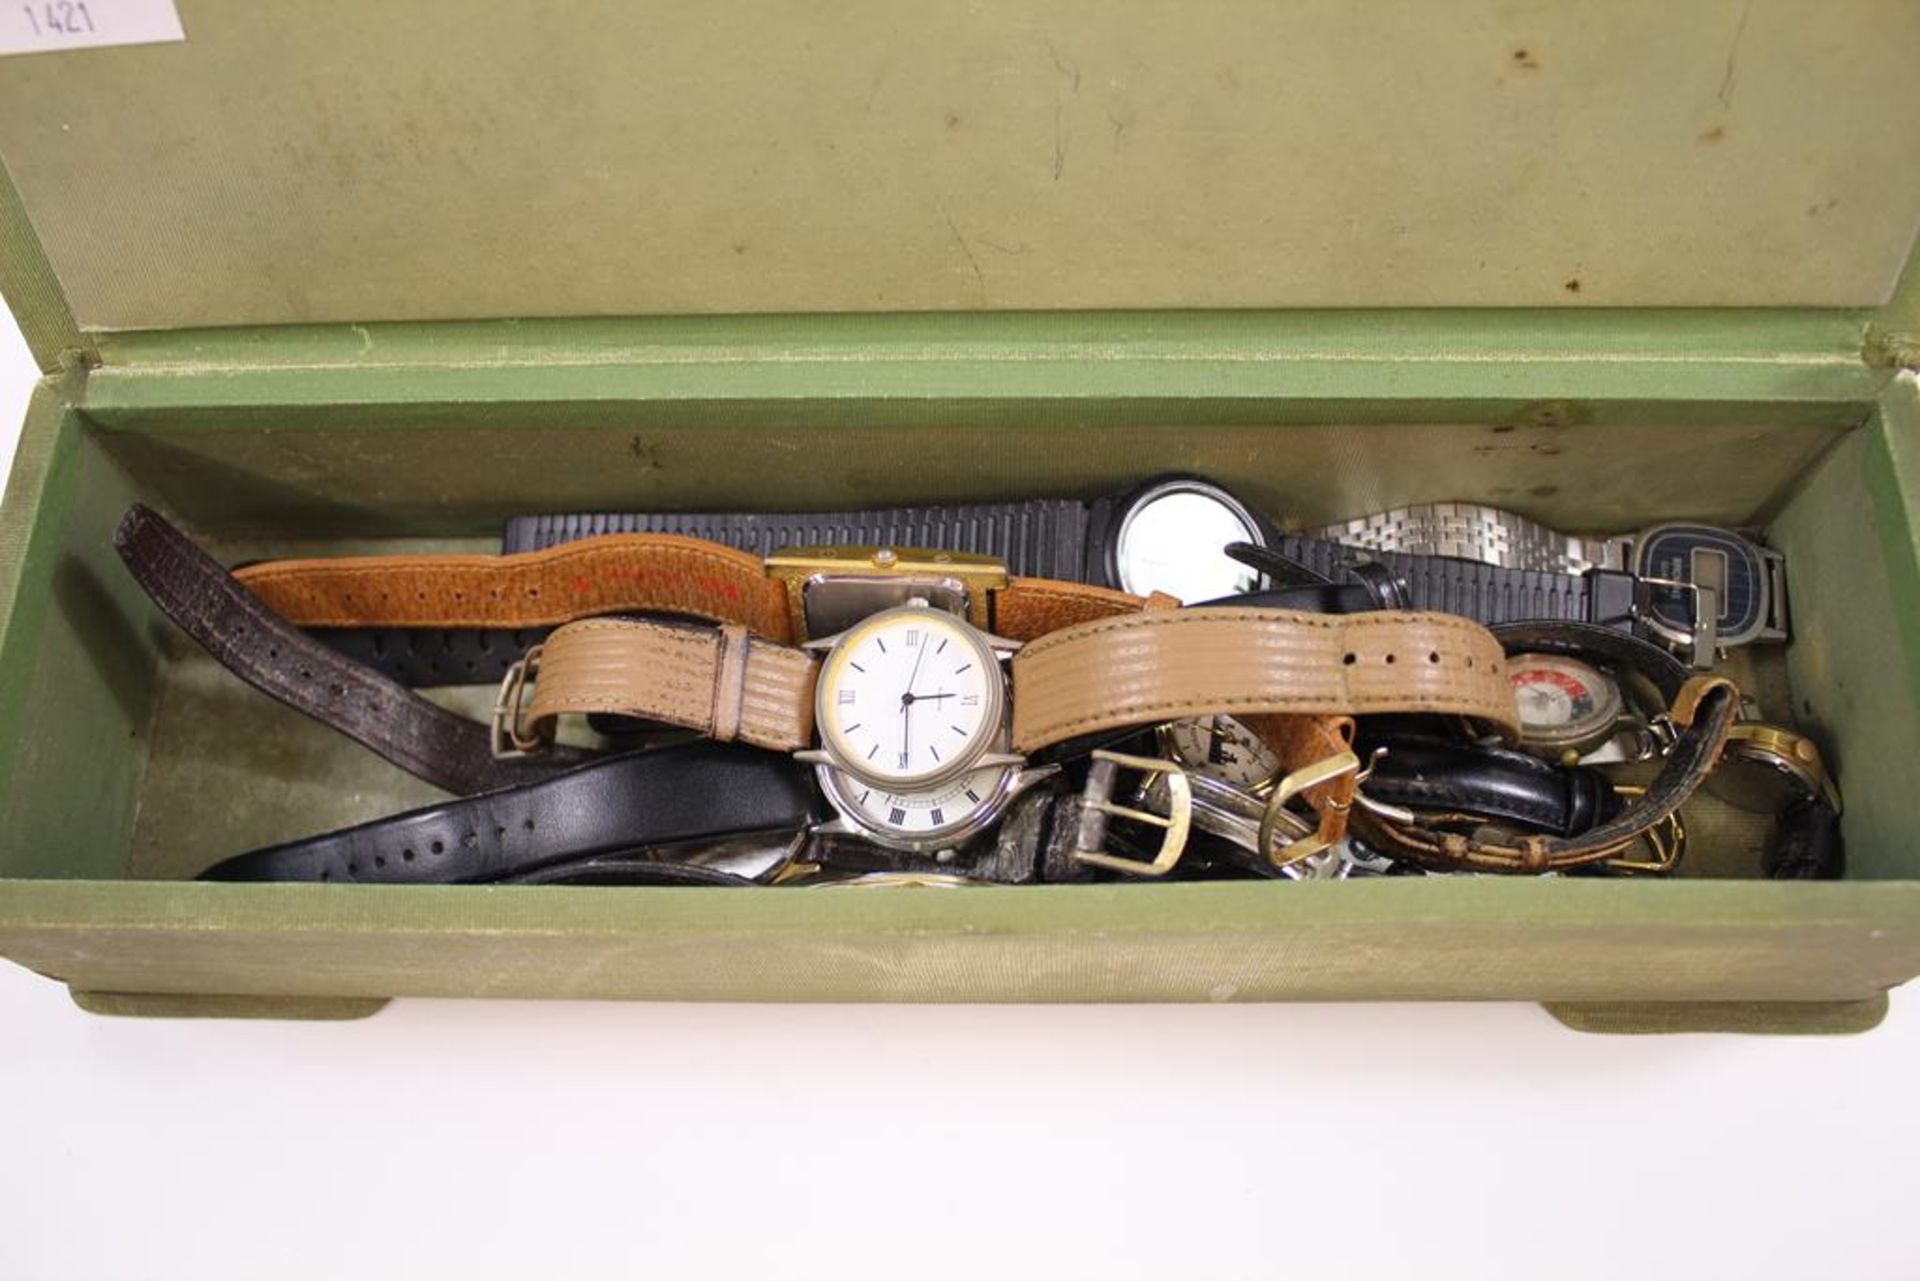 A collection of Sixteen mostly Quartz Wrist Watches by Limit, Seiko, Sekonda etc. (Est.£30-£40) - Image 2 of 2